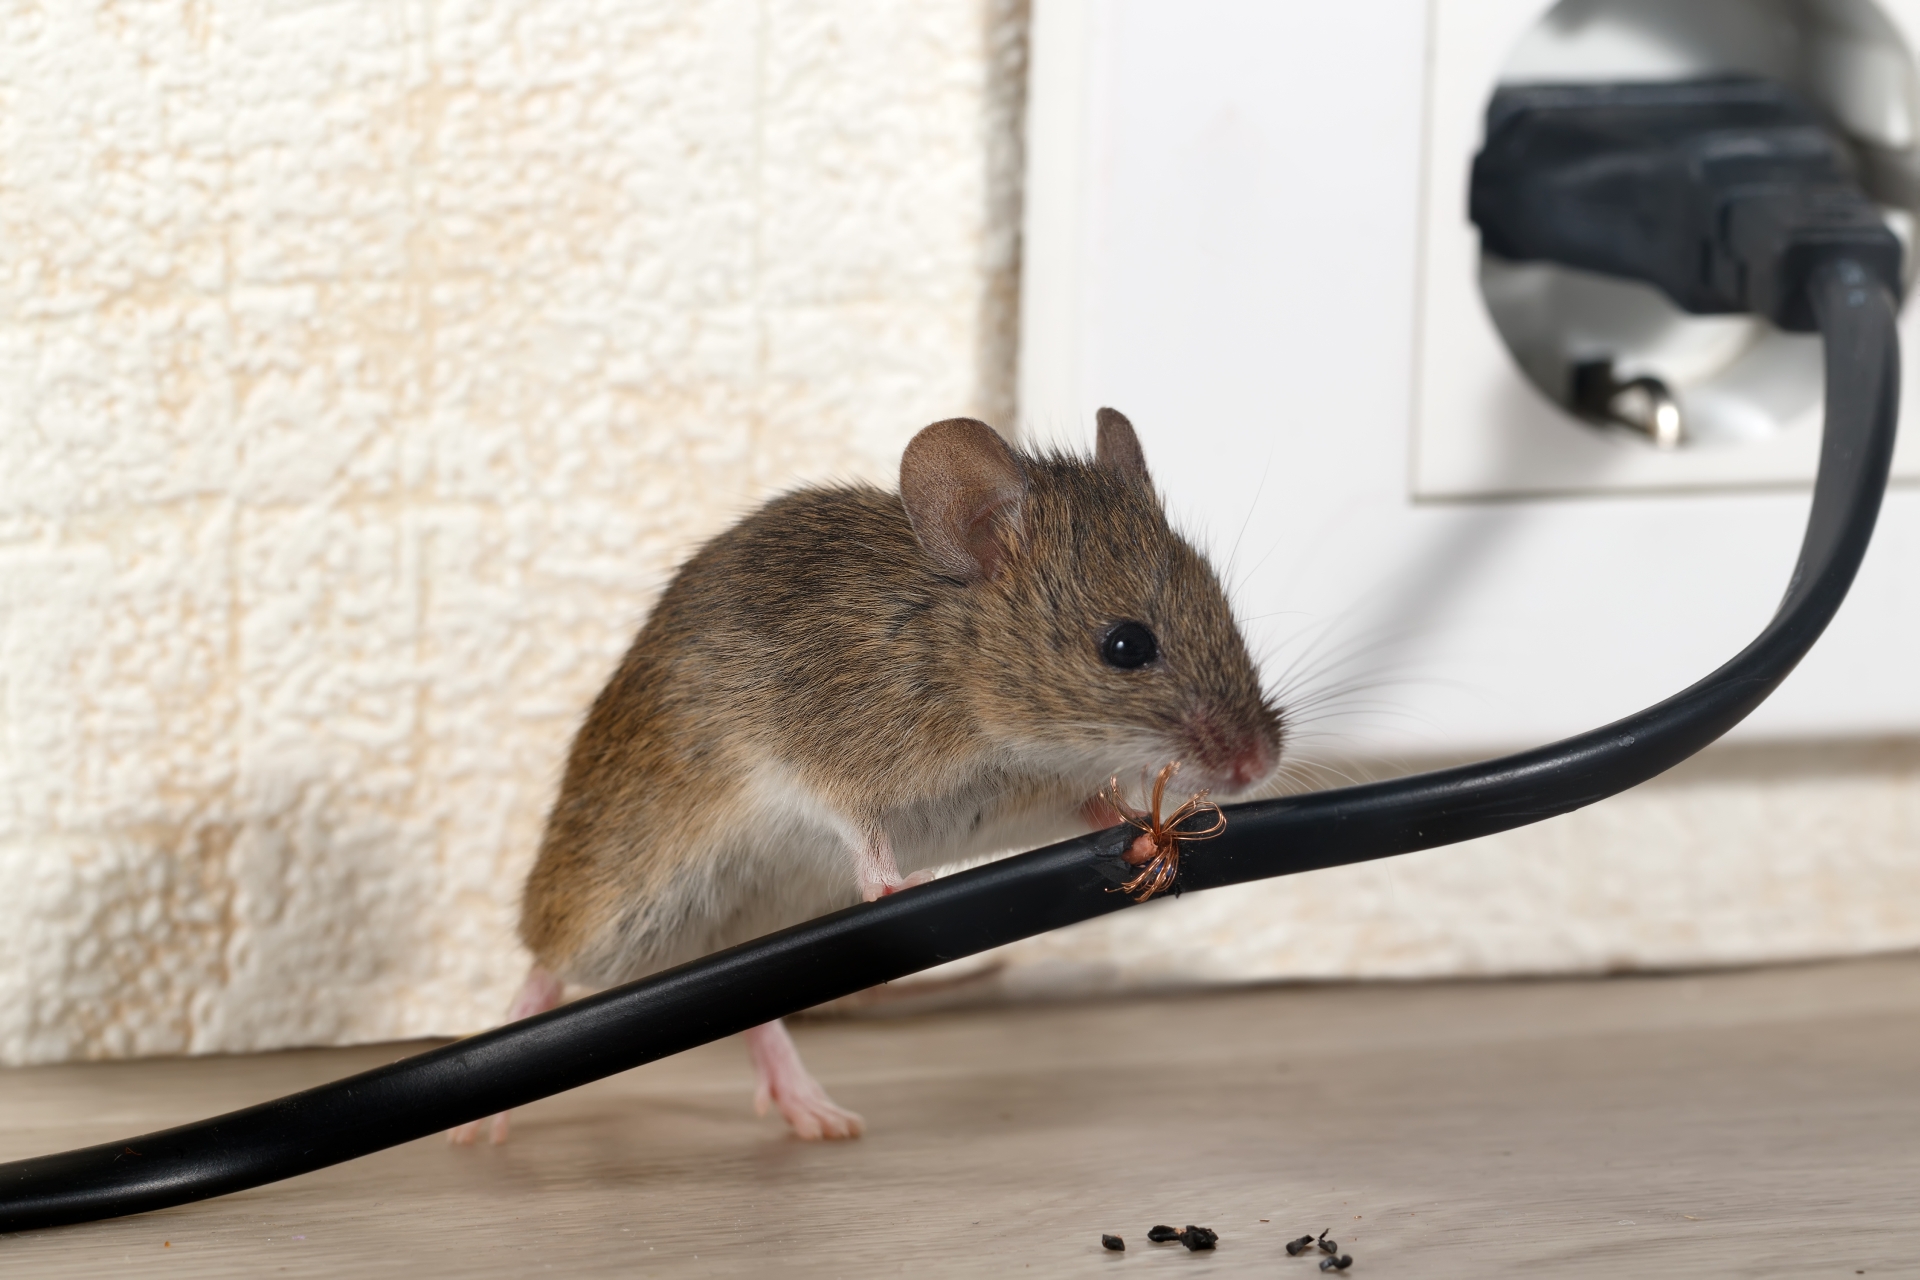 Mice Infestation, Pest Control in Thamesmead, SE28. Call Now 020 8166 9746